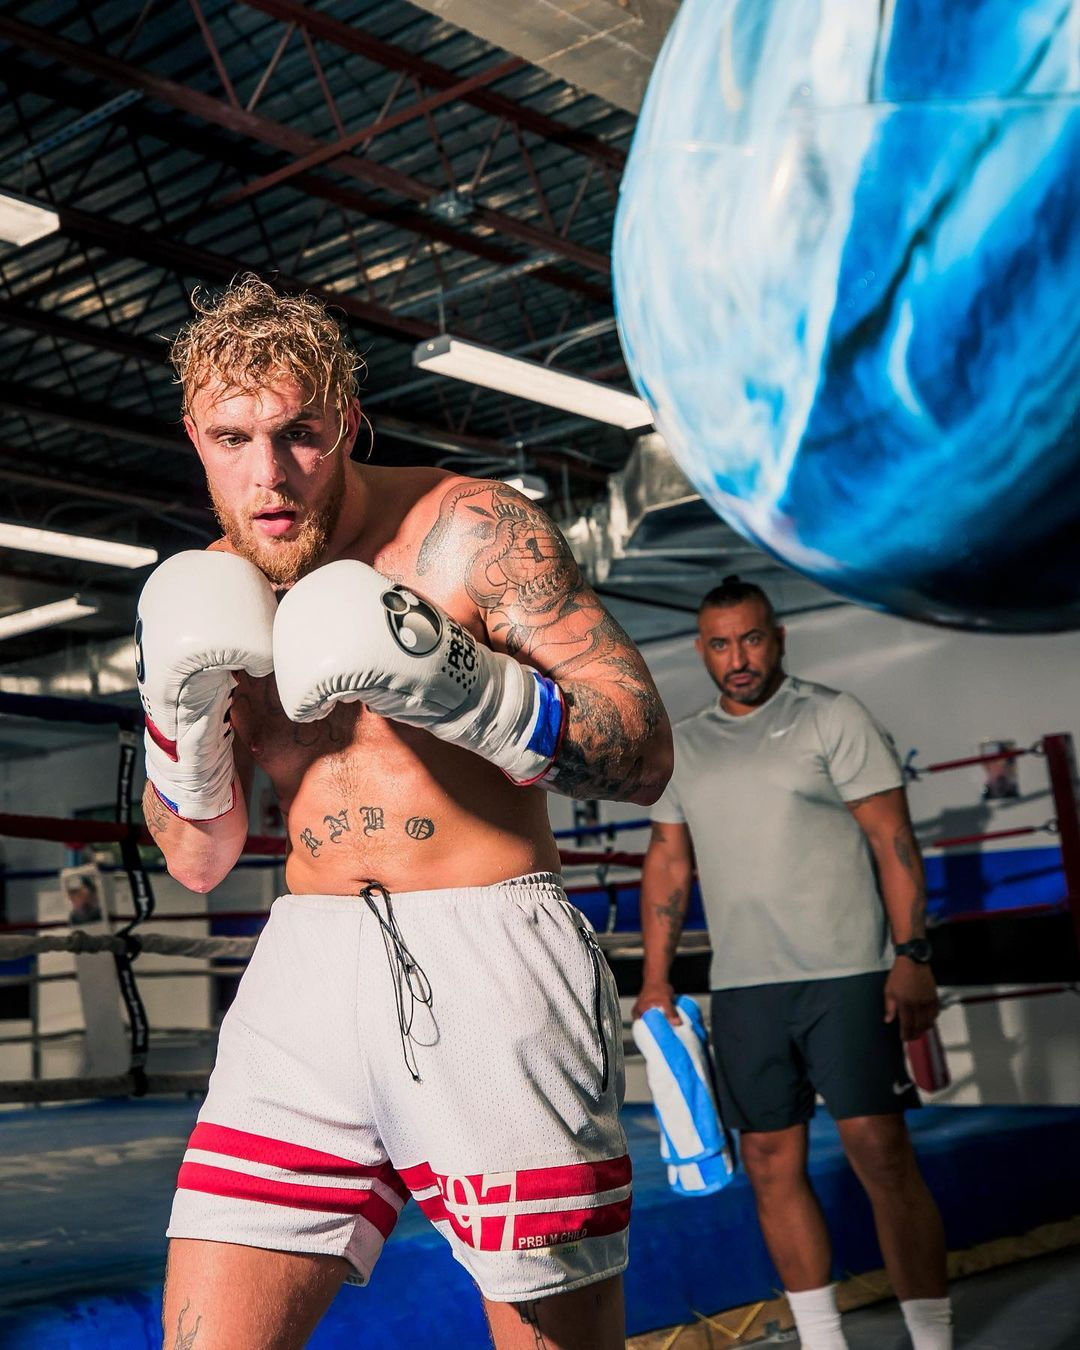 Jake Paul's training camp for Tyron Woodley ex-UFC star, including sparring 150 rounds with ex-world champions